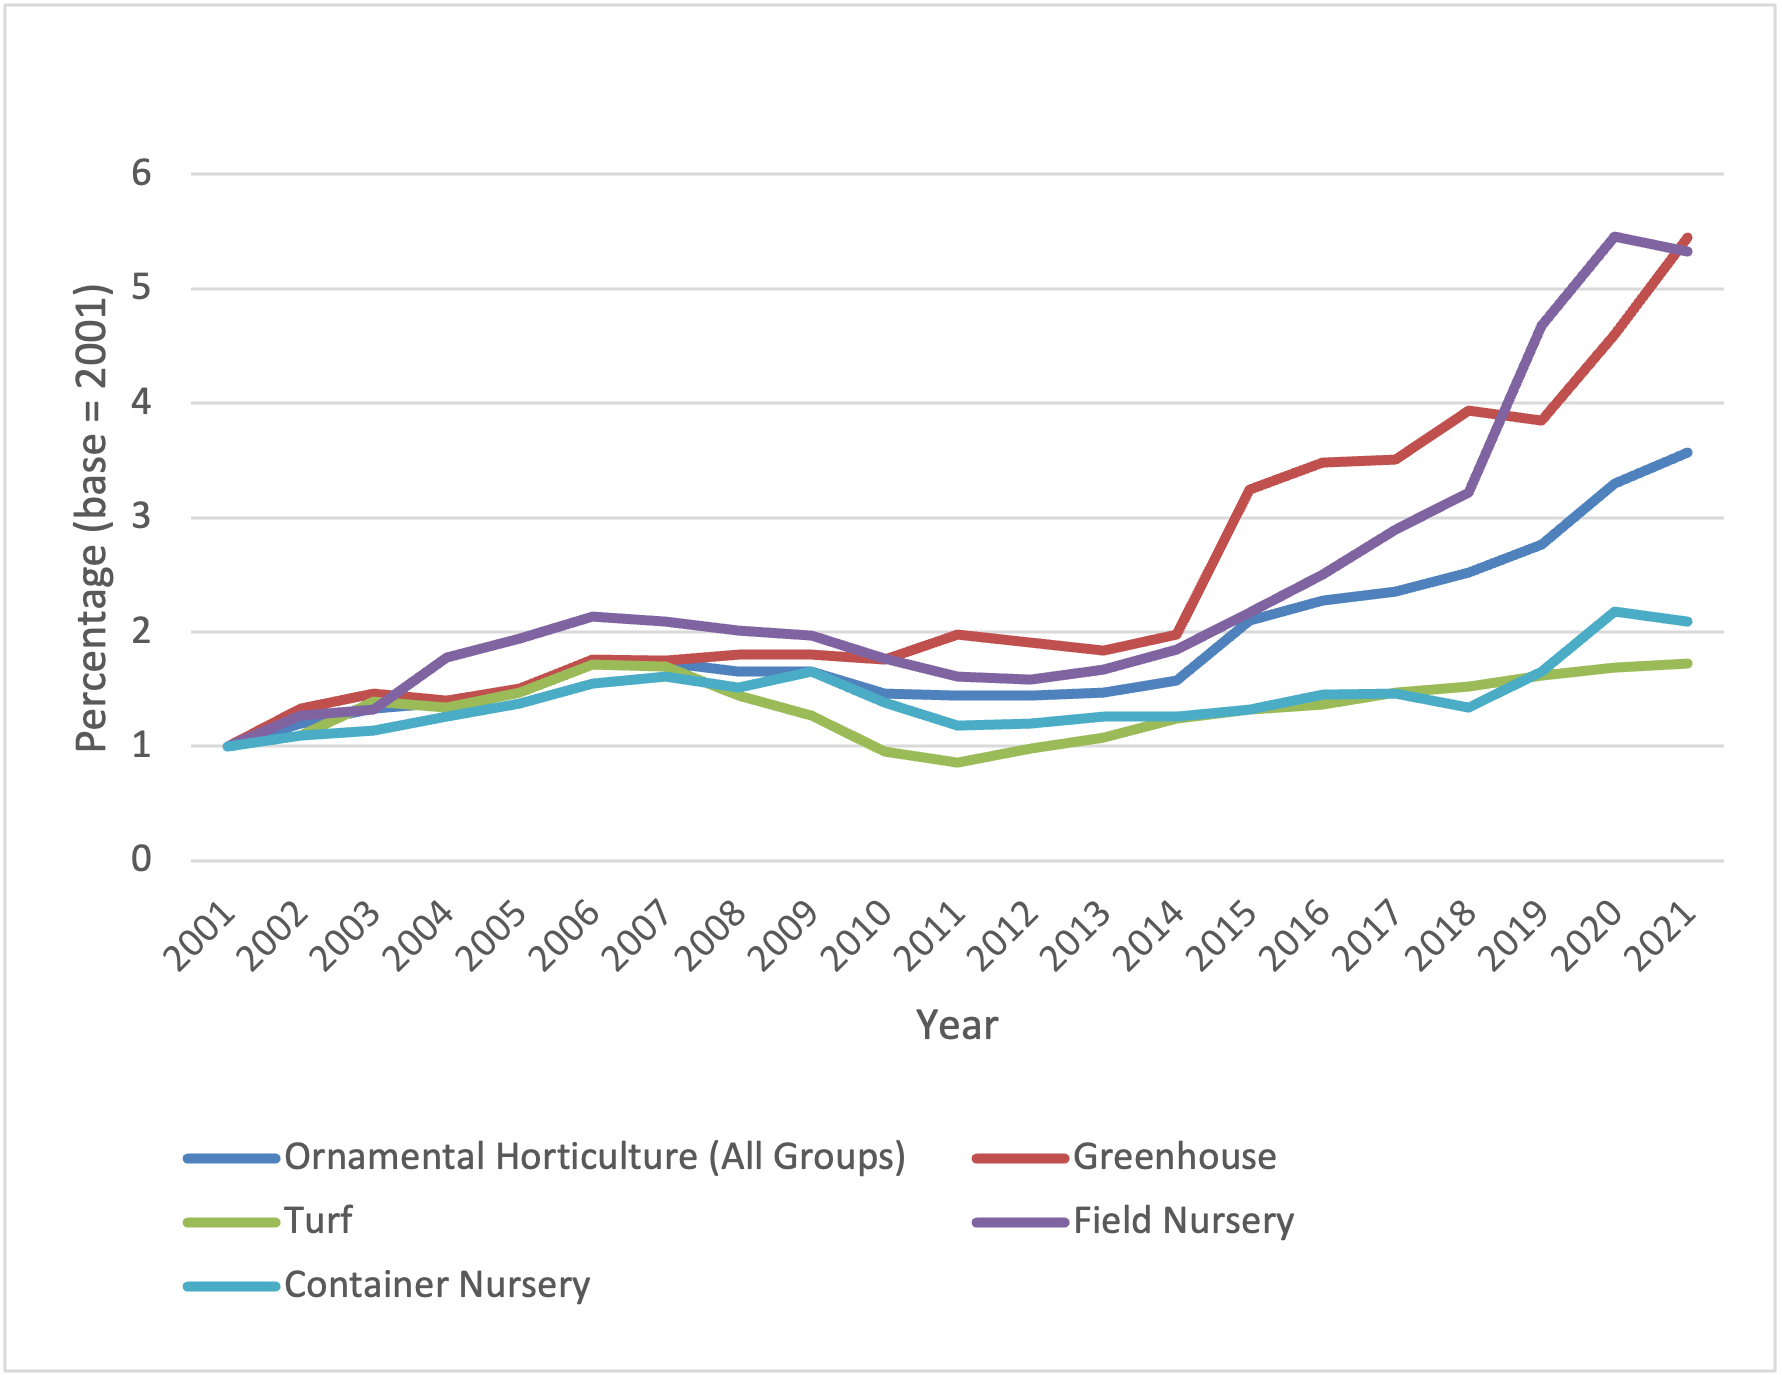 Breakdown of percentage growth by sector for the ornamental horitculture industry, with the biggest gains from 2020 to 2021 in the greenhouse and field nursery sectors, both above 5%. Ornamental horticulture had about 3.5% growth, container nurseries had just above 2% growth and turfgrass had a little less than 2% growth in the same period.